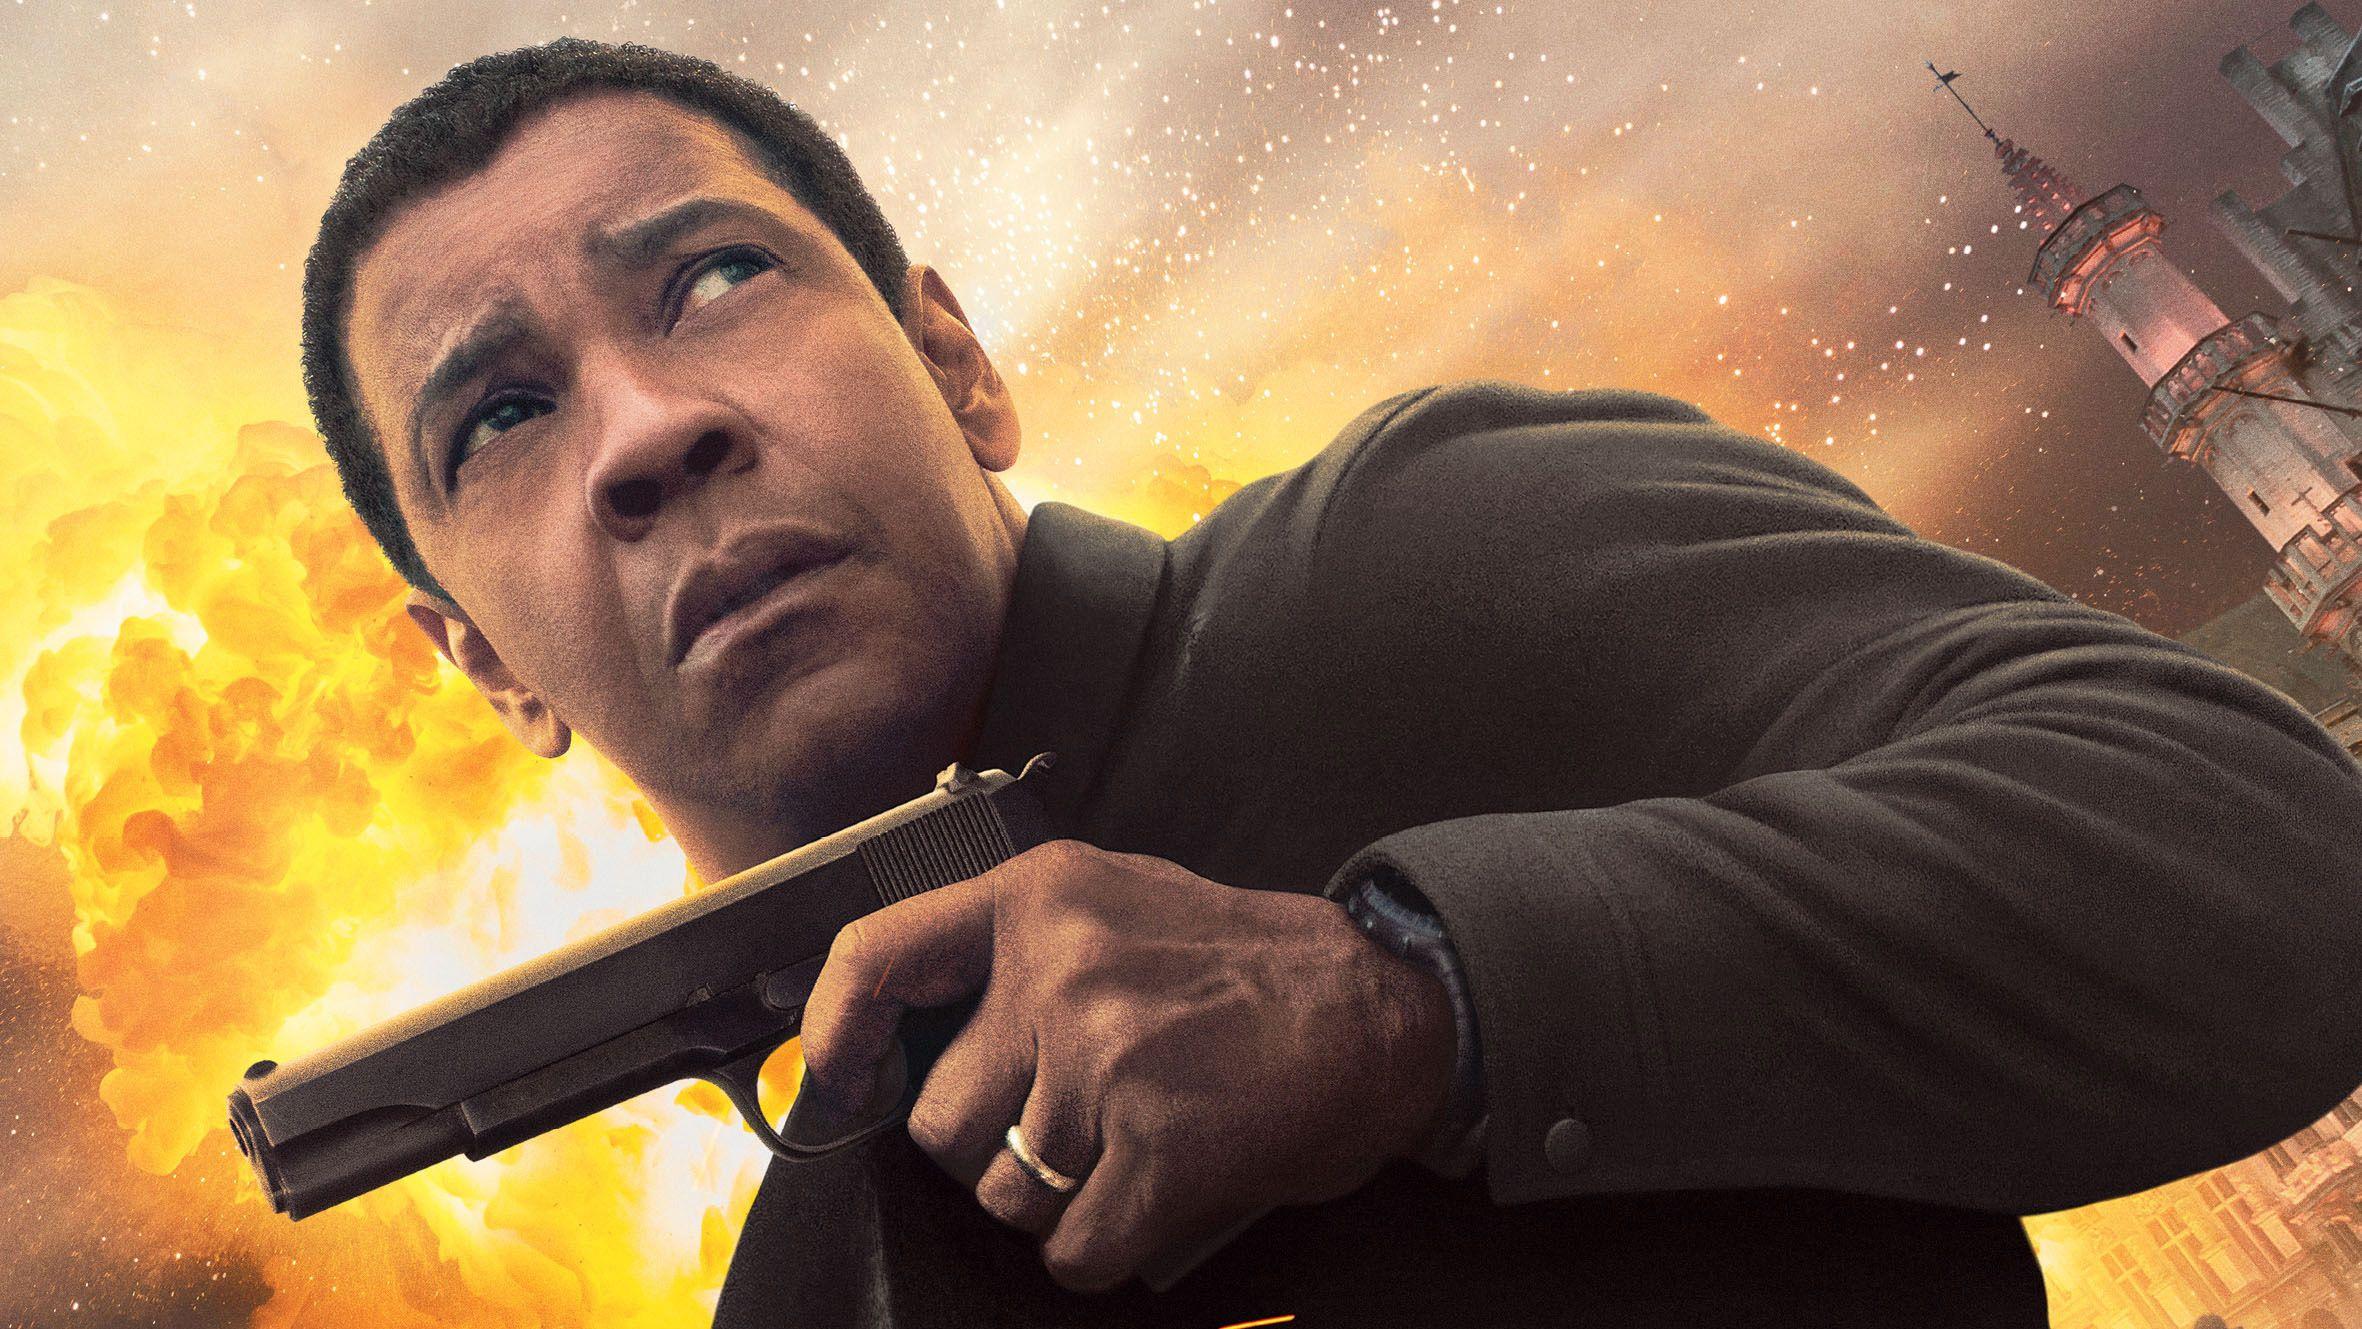 The Equalizer 2 Movie HD Movies, 4k Wallpaper, Image